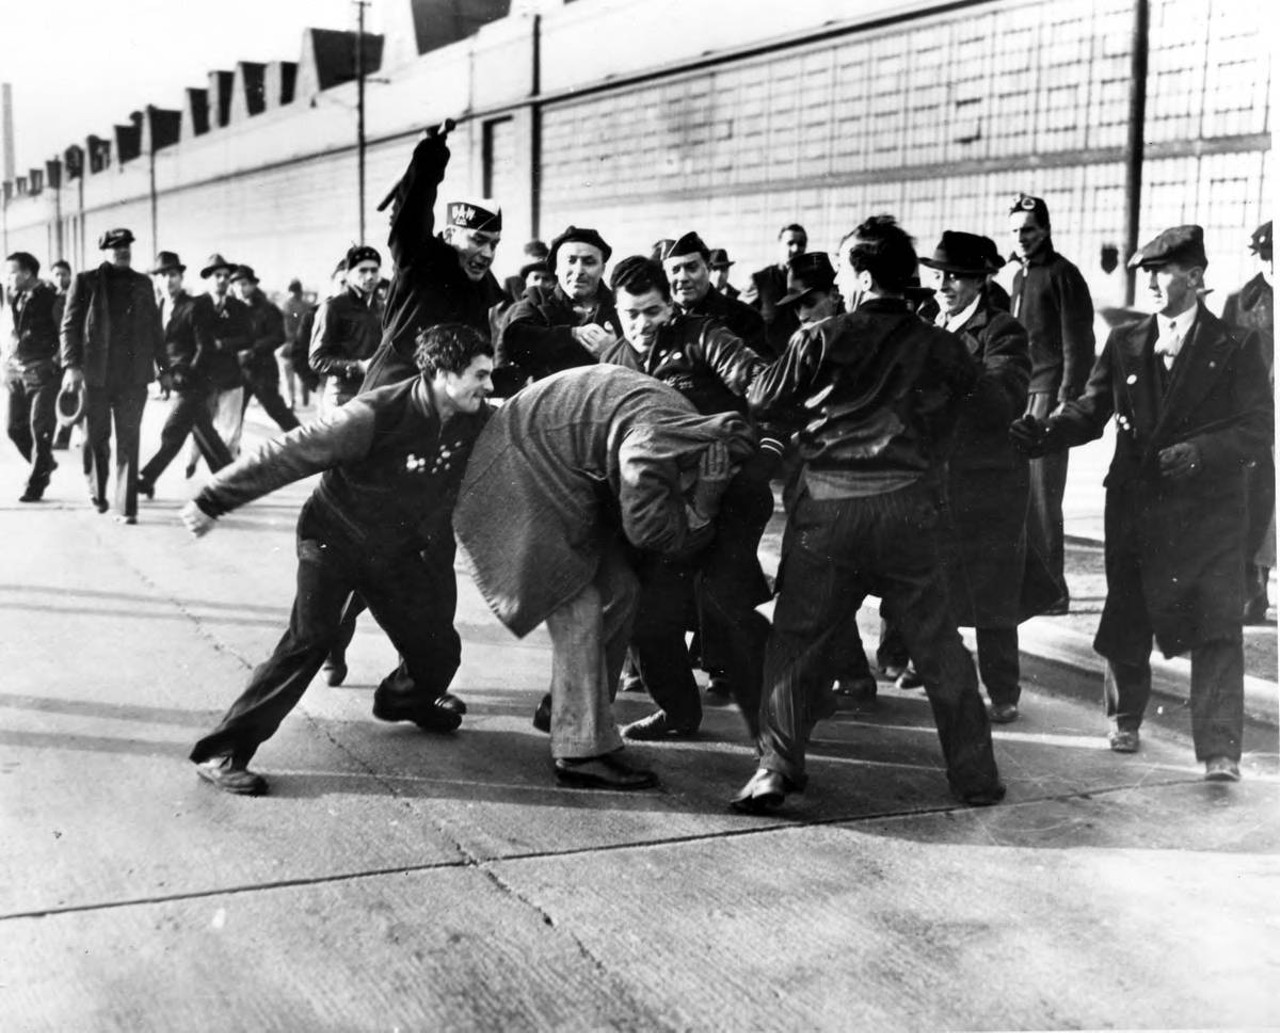 
April 3, 1941: Violent scene of UAW members attacking a man trying to cross a picket line at Ford Motor Company in Dearborn. This photograph taken by Detroit News photographer Milton Brooks won the first Pulitzer Prize for photography in 1942.